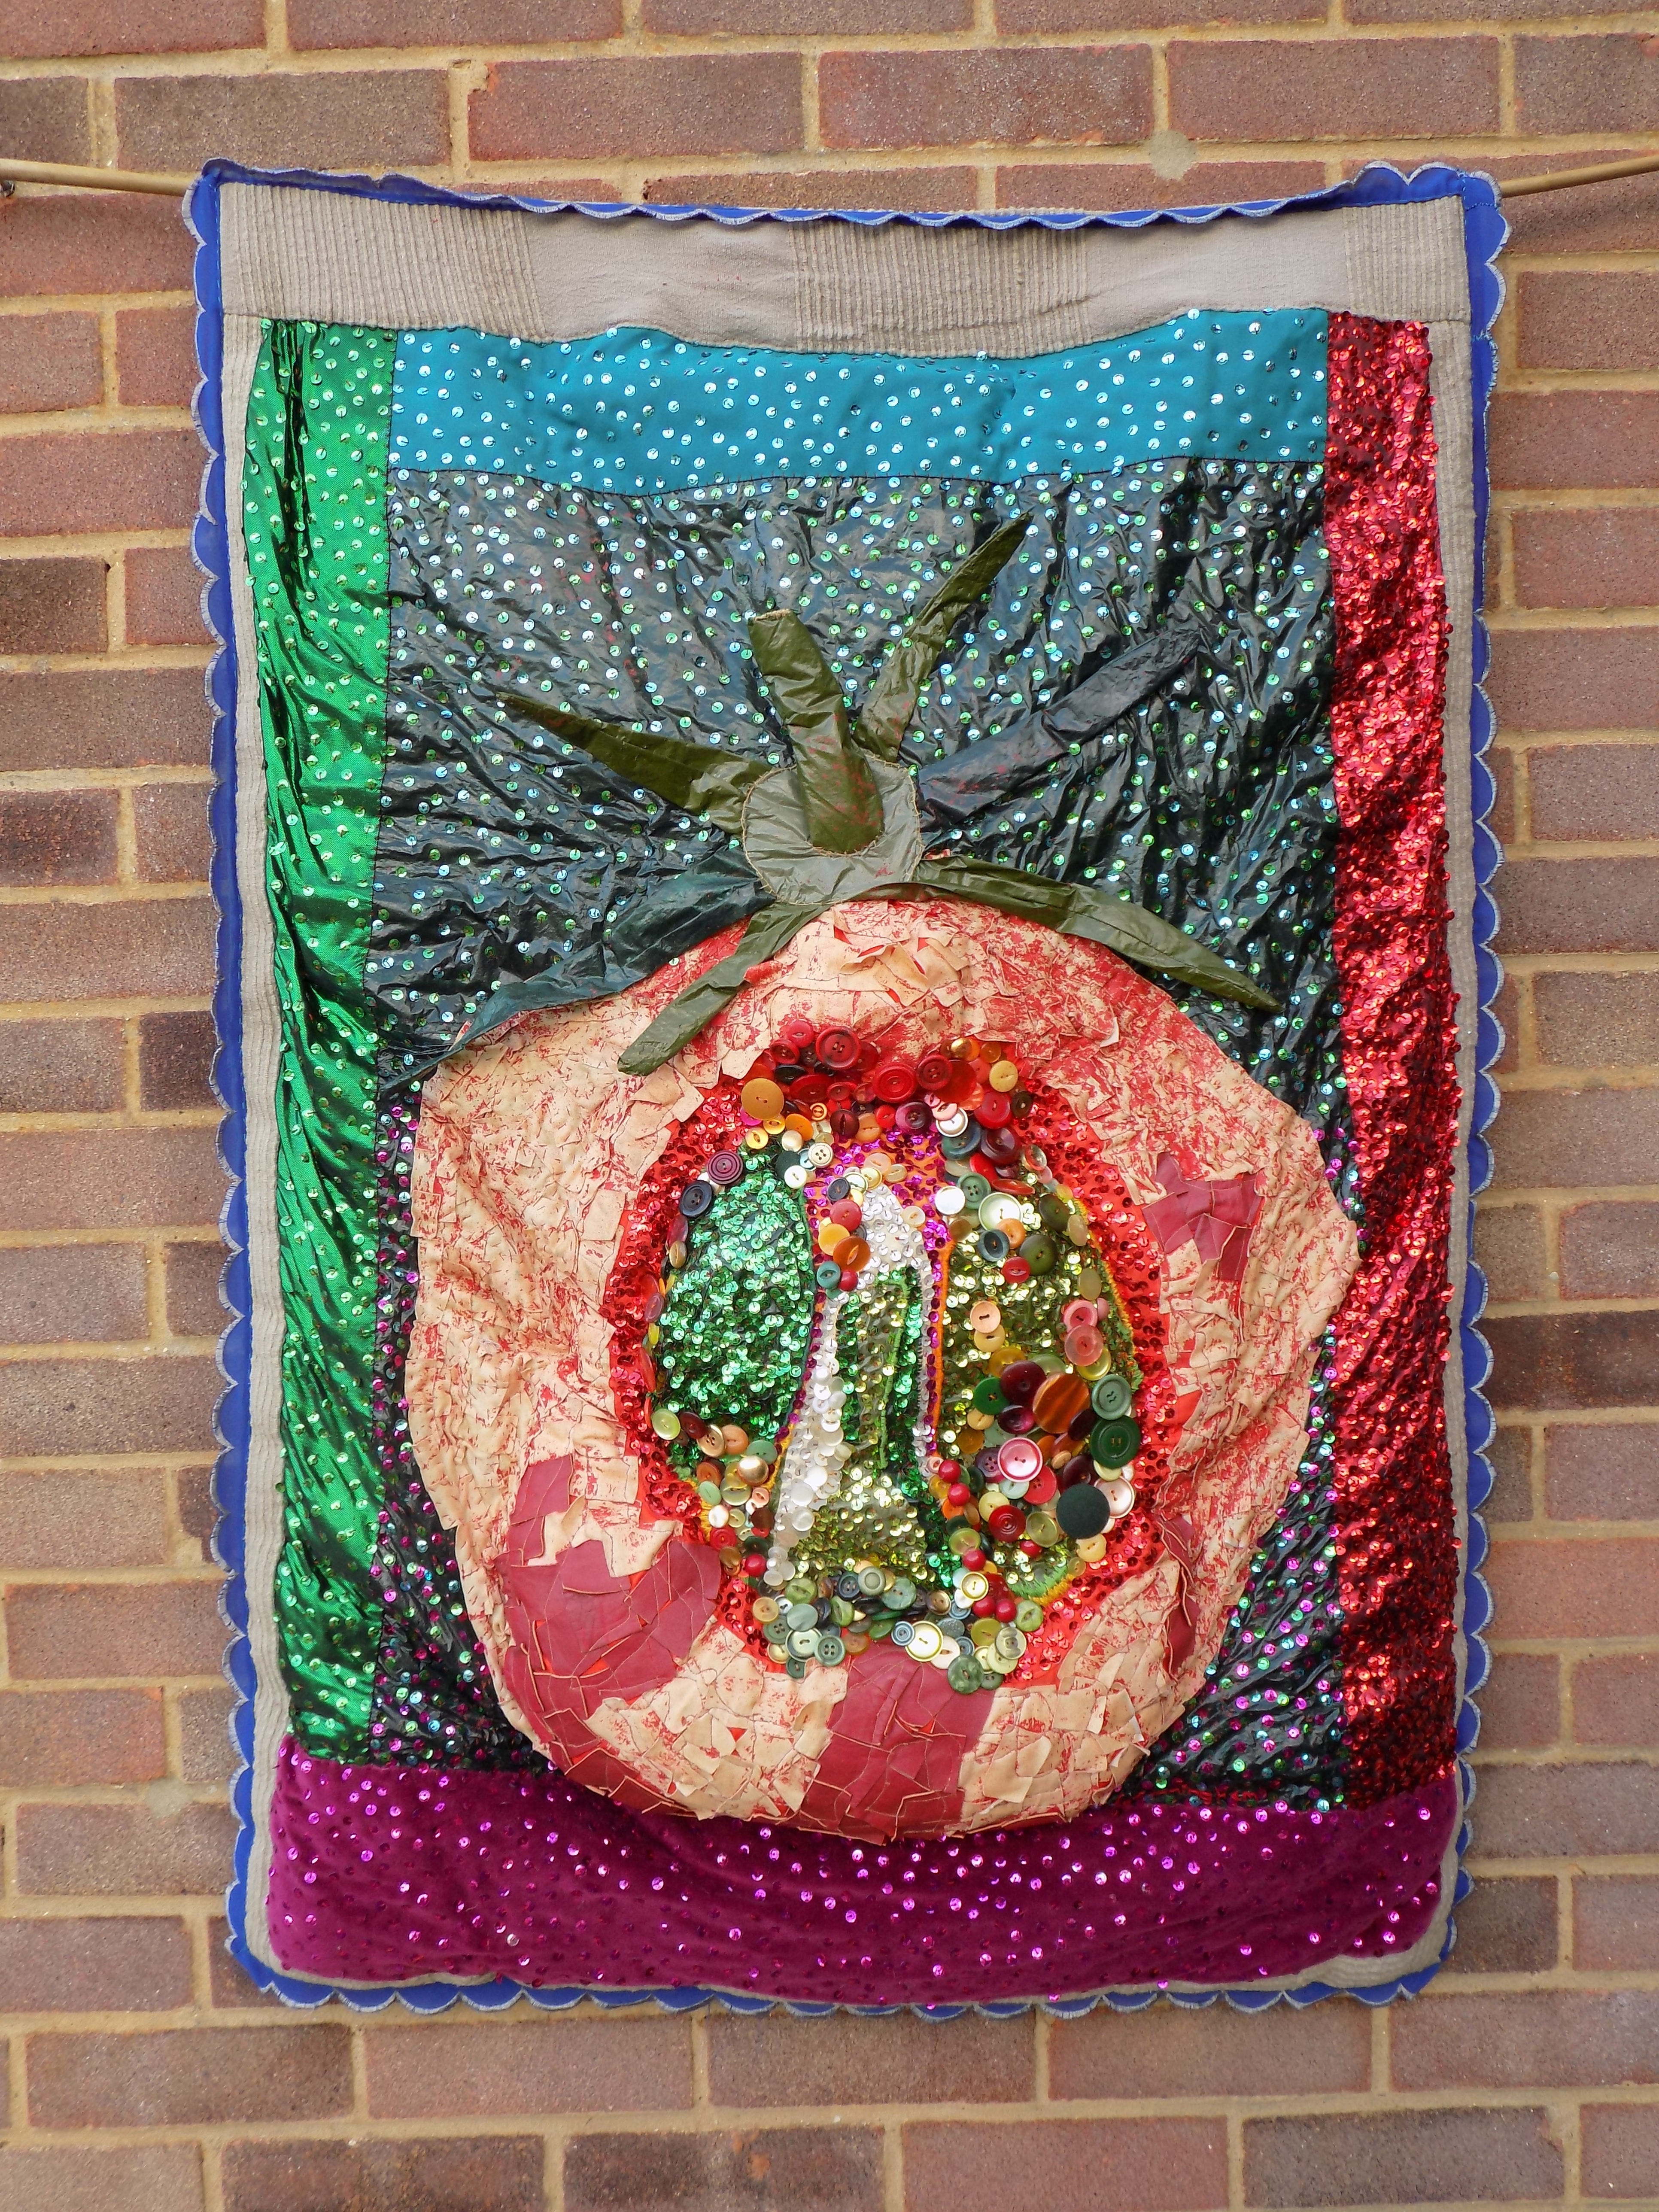 Christine Cunningham; Tomato, 2017, Original Textile, 35 x 49 inches. Artwork description: 241 Abstract creation of the tomato in an explorative 3D padded applique, heavily embellished in buttons and sequins.  Vibrant colour palette of ivory, reds and greens.  Real depth achieved in the 3D structure, with padded and cavity areas to explore.  Eroded rubber, leather and plastics were used for ...